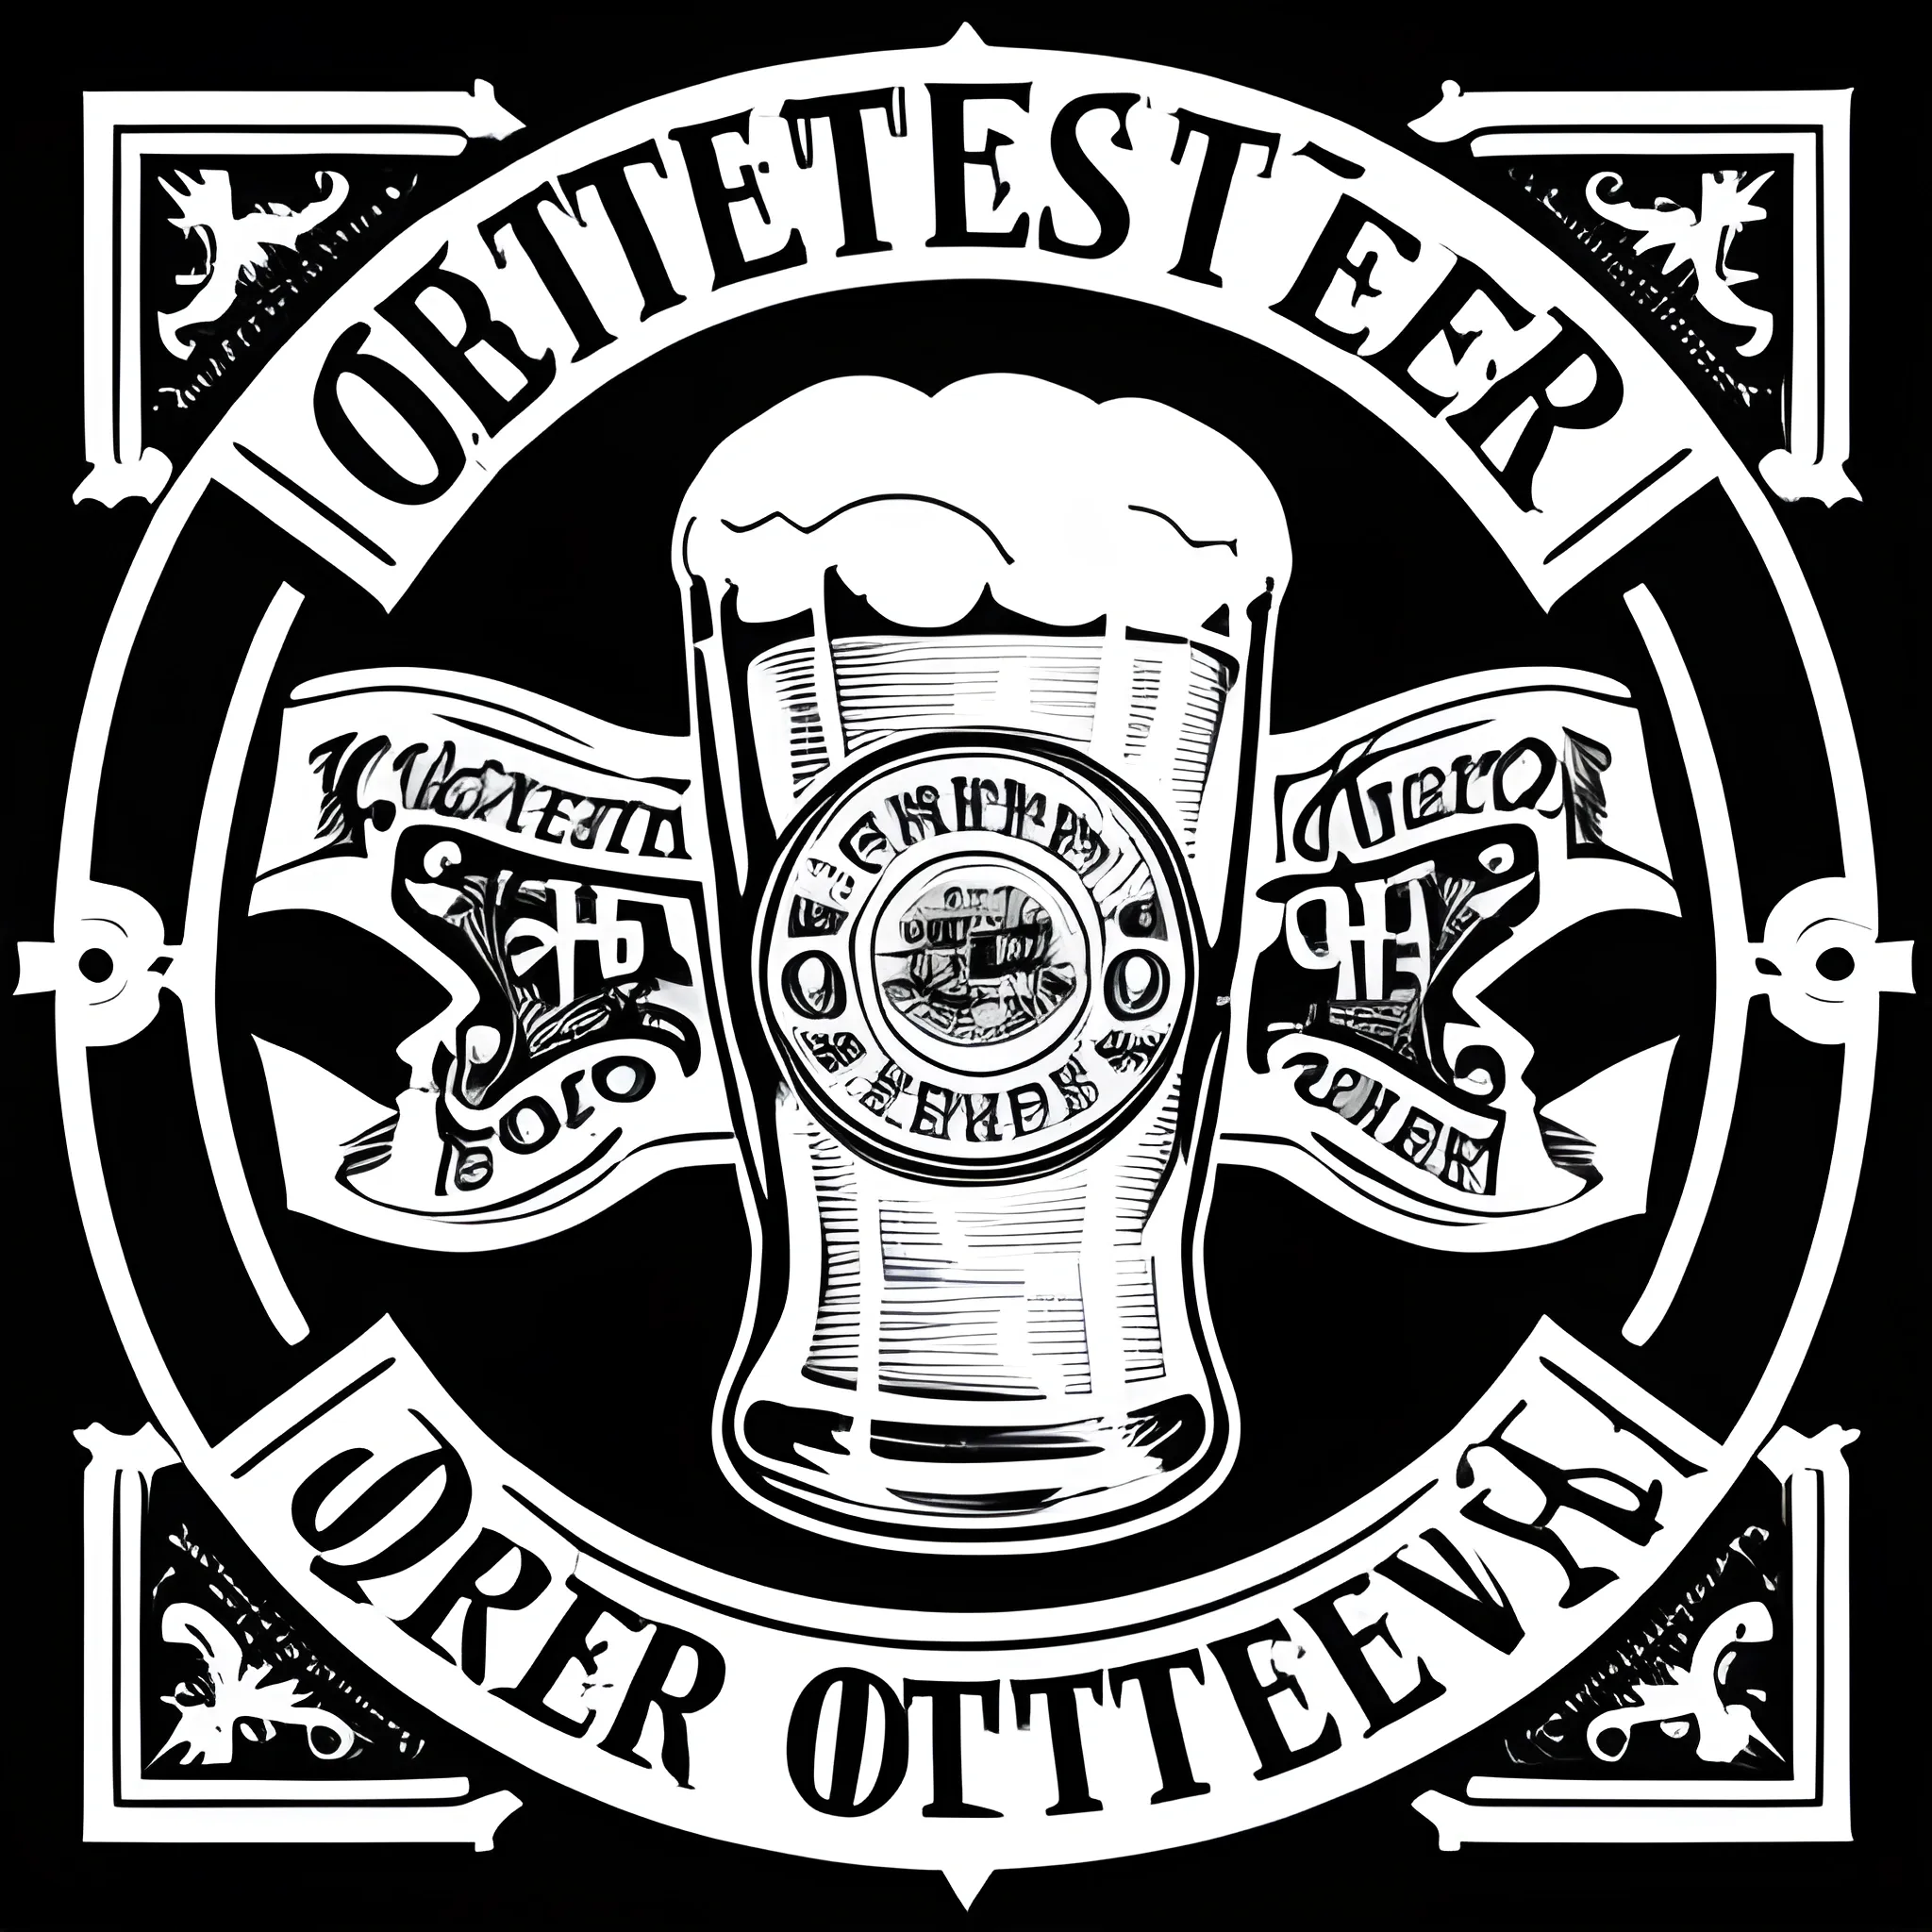 Oktoberfest logo, one beer, table, no text, black and white